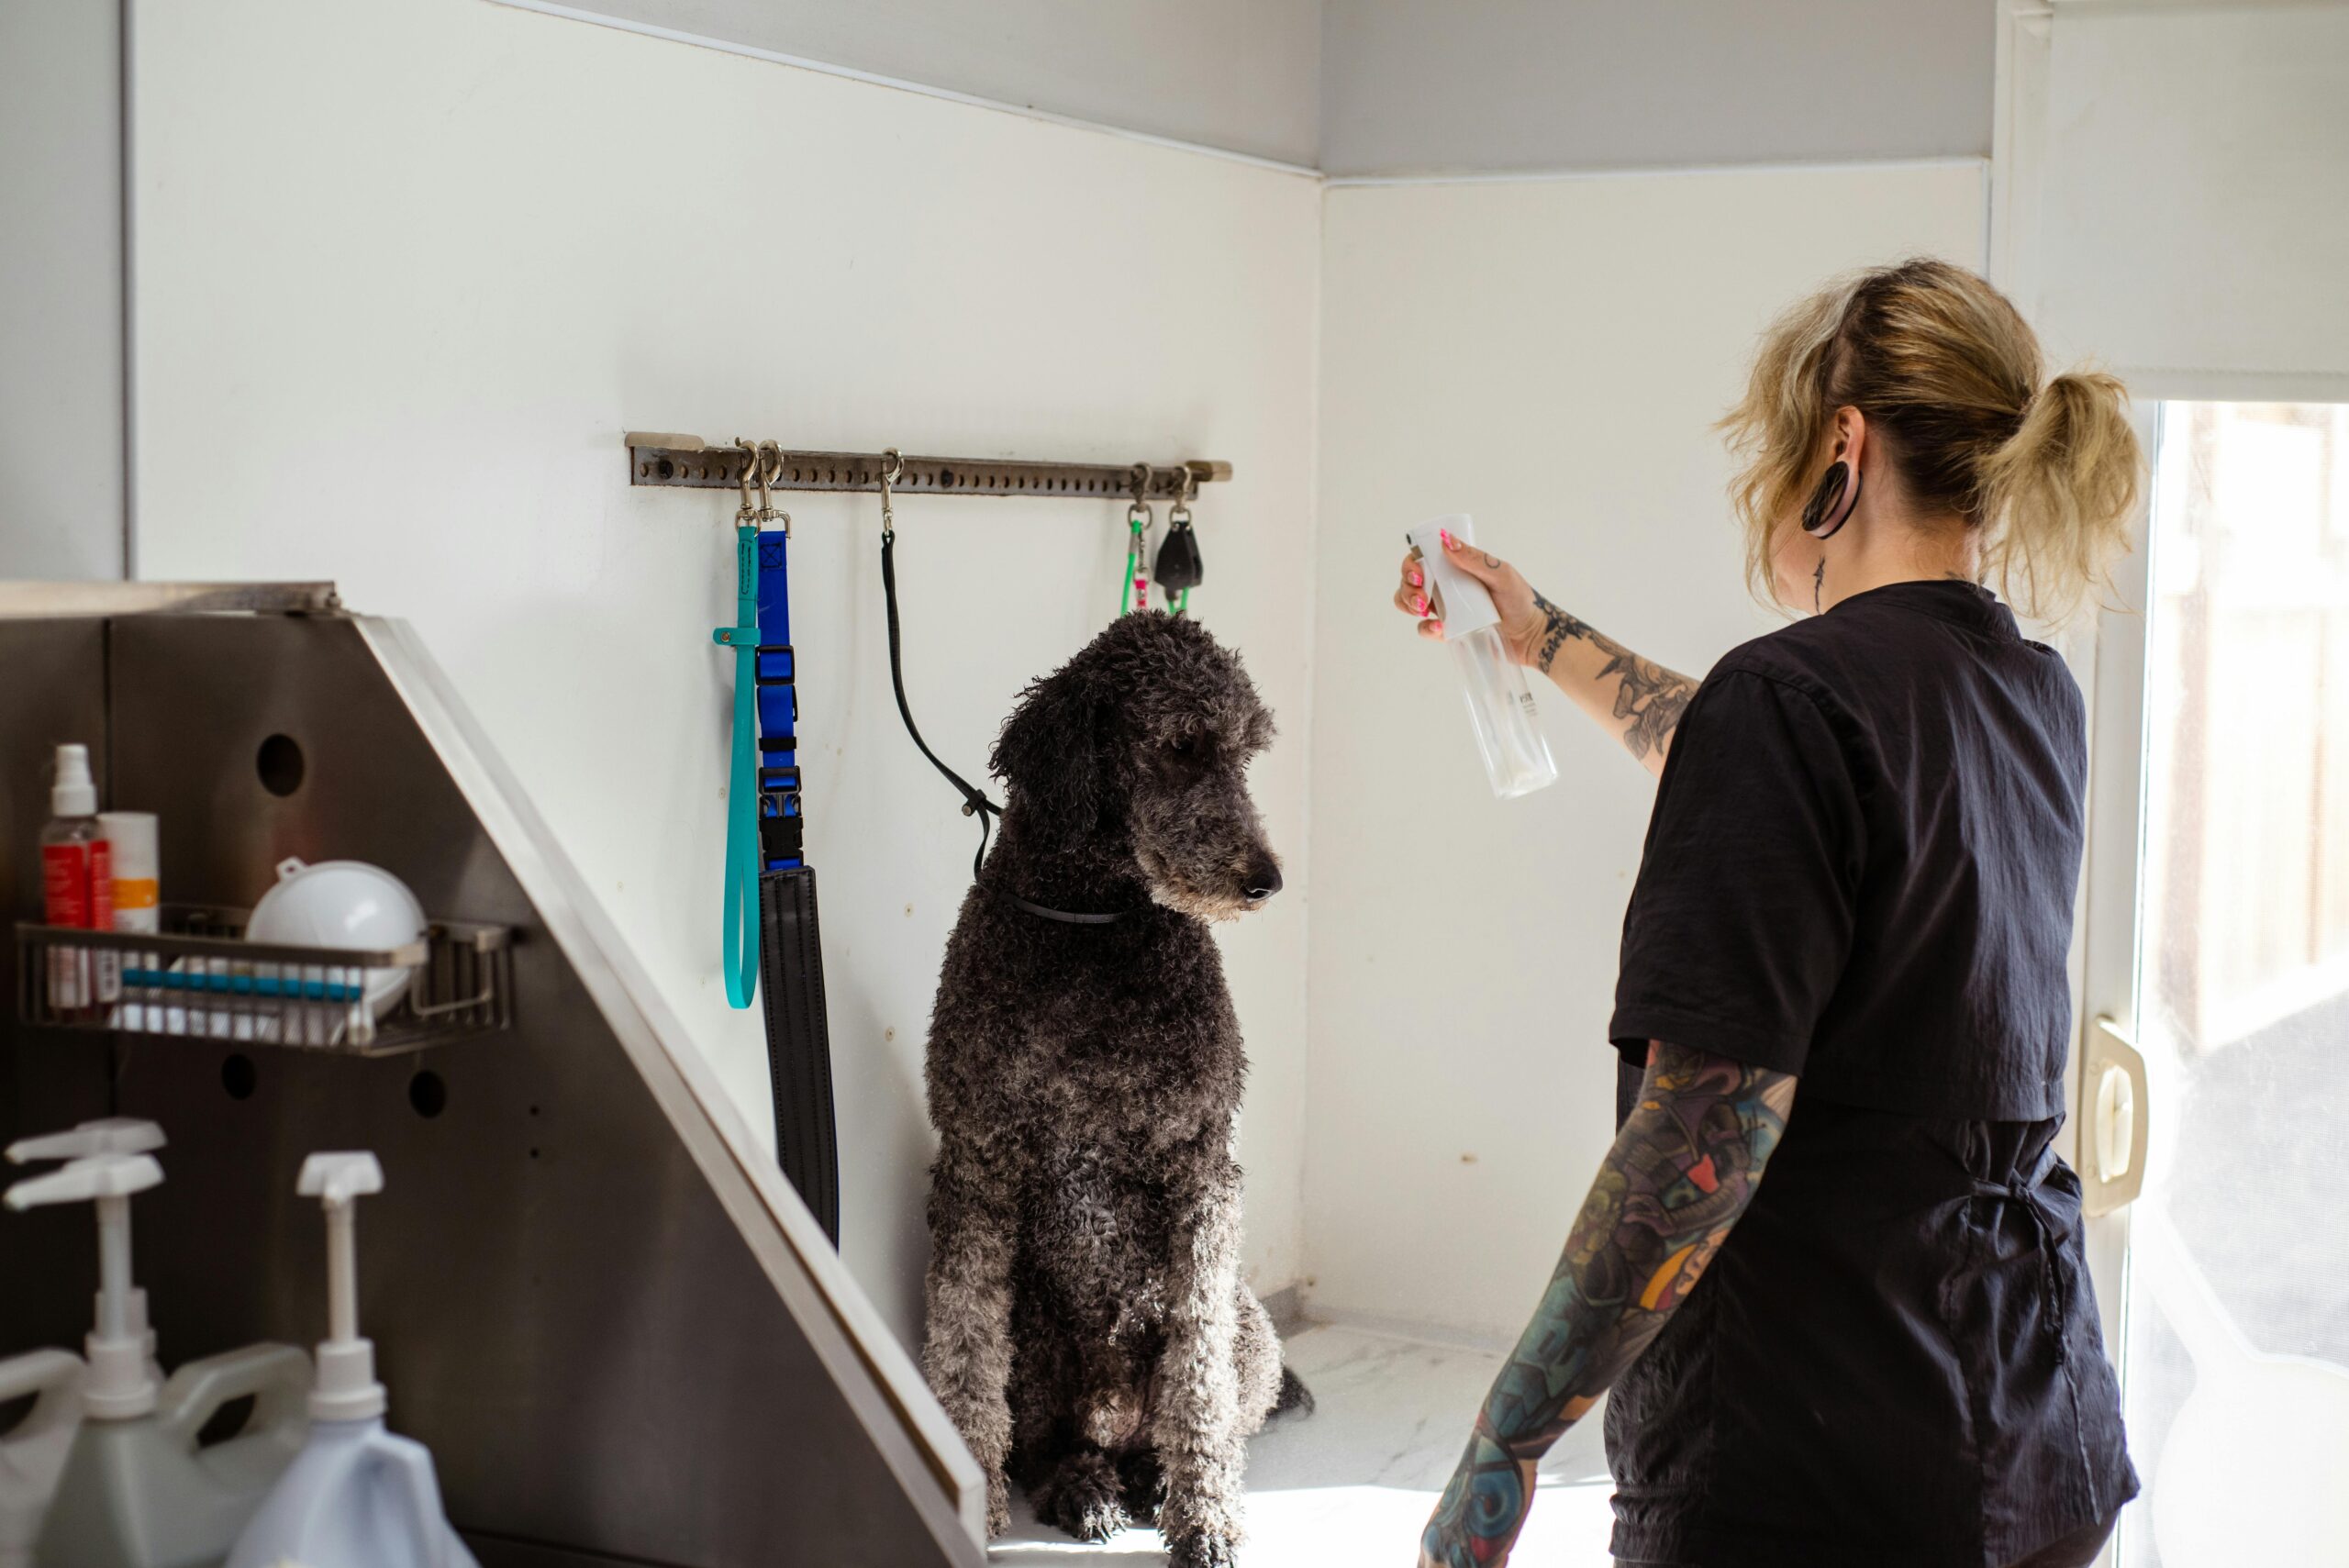 Gratuity Guide: How Much to Tip Dog Groomer